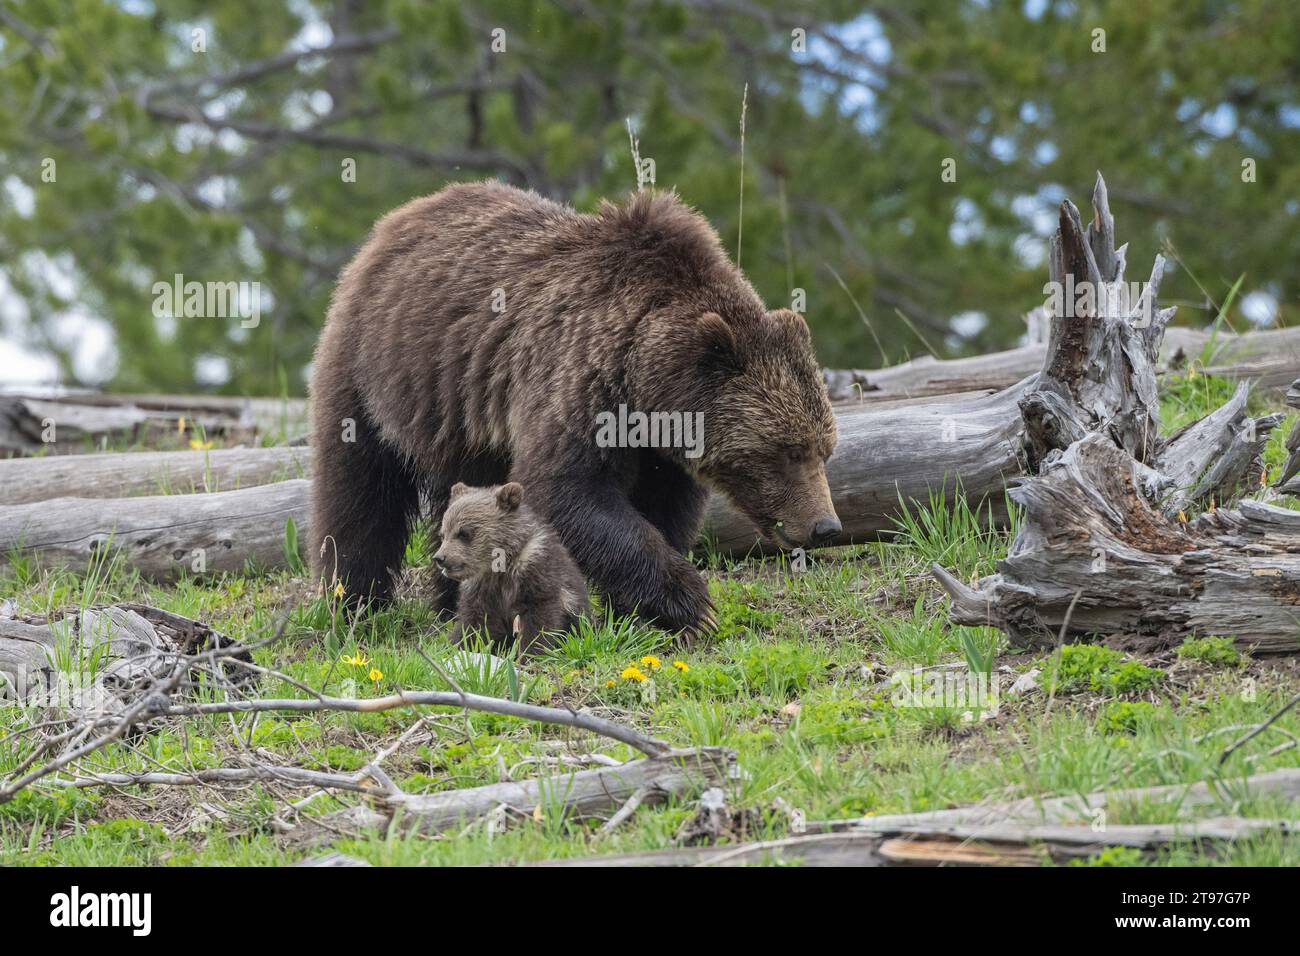 Grizzly Bear (Ursus arctos) mother with babies. Springtime in Yellowstone National Park, Wyoming. Stock Photo